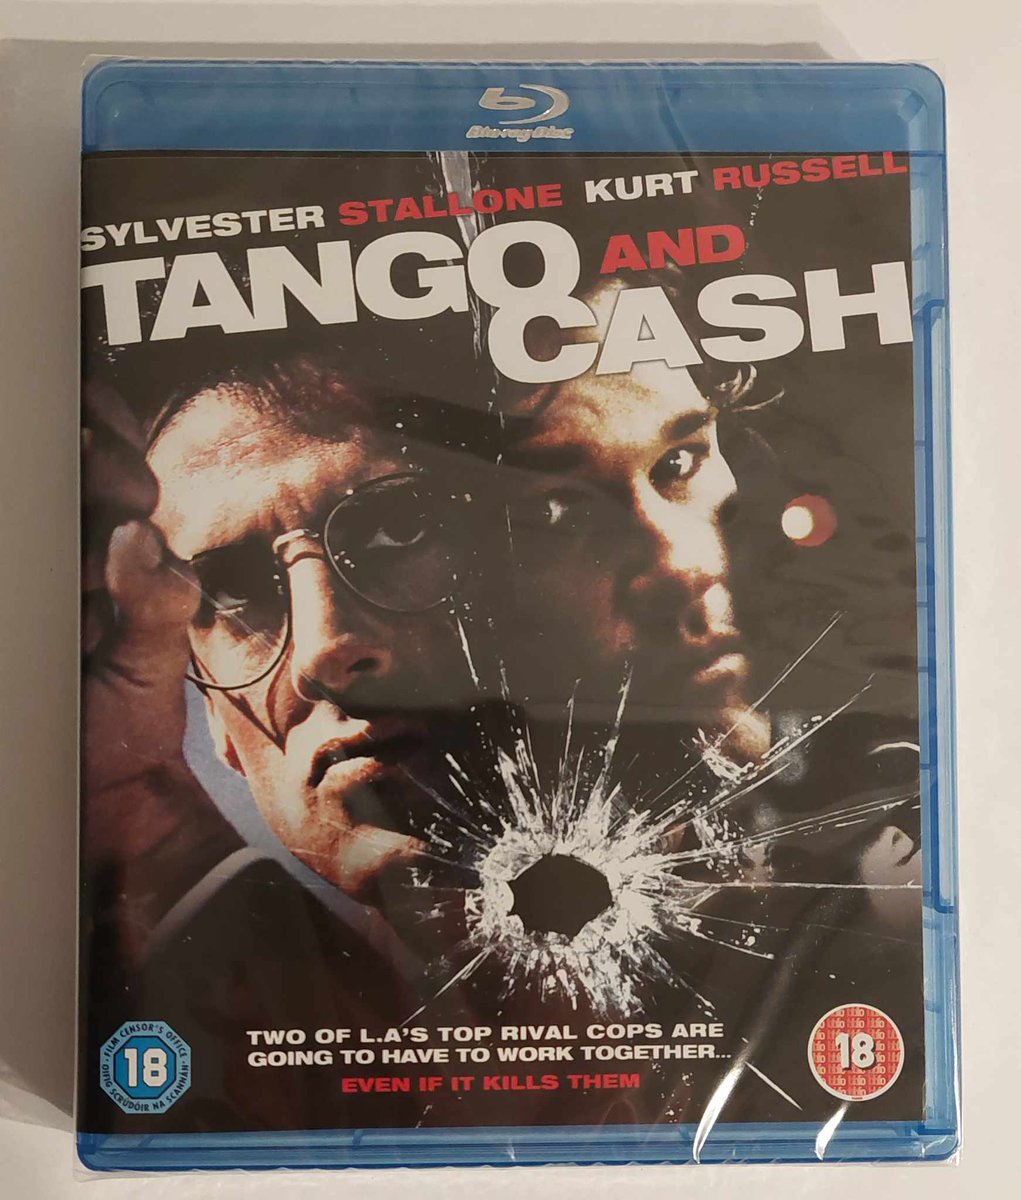 #rewatching 

This has to be the first time watch since back in 1989/90 for me 

#sylvesterstallone #kurtrussell #robertzdar #buddycop #actionmovies #tangoandcash #jackpalance #brionjames #jameshong #terihatcher